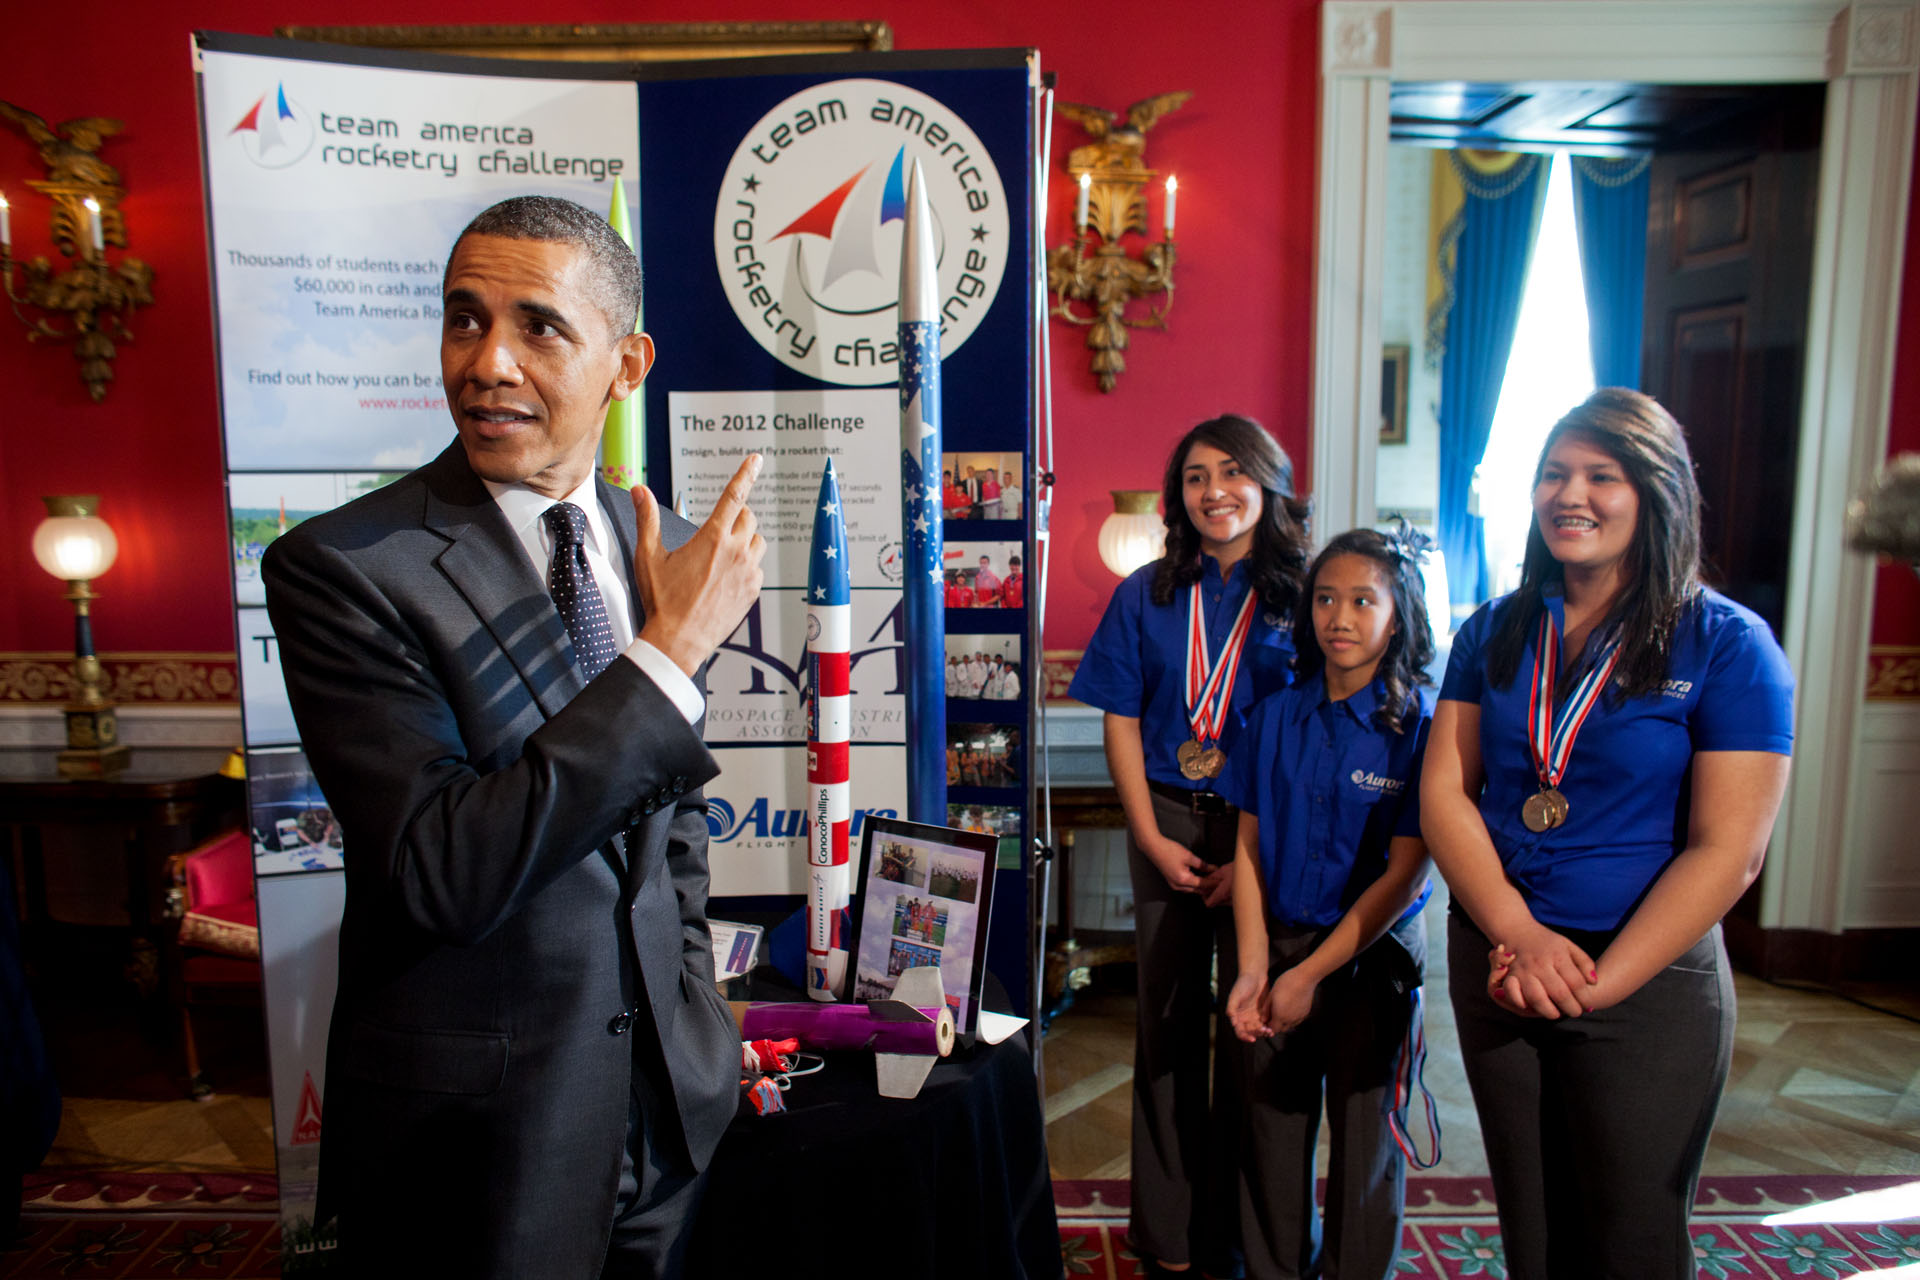 President Obama meets with rocketry team from Presidio, Texas